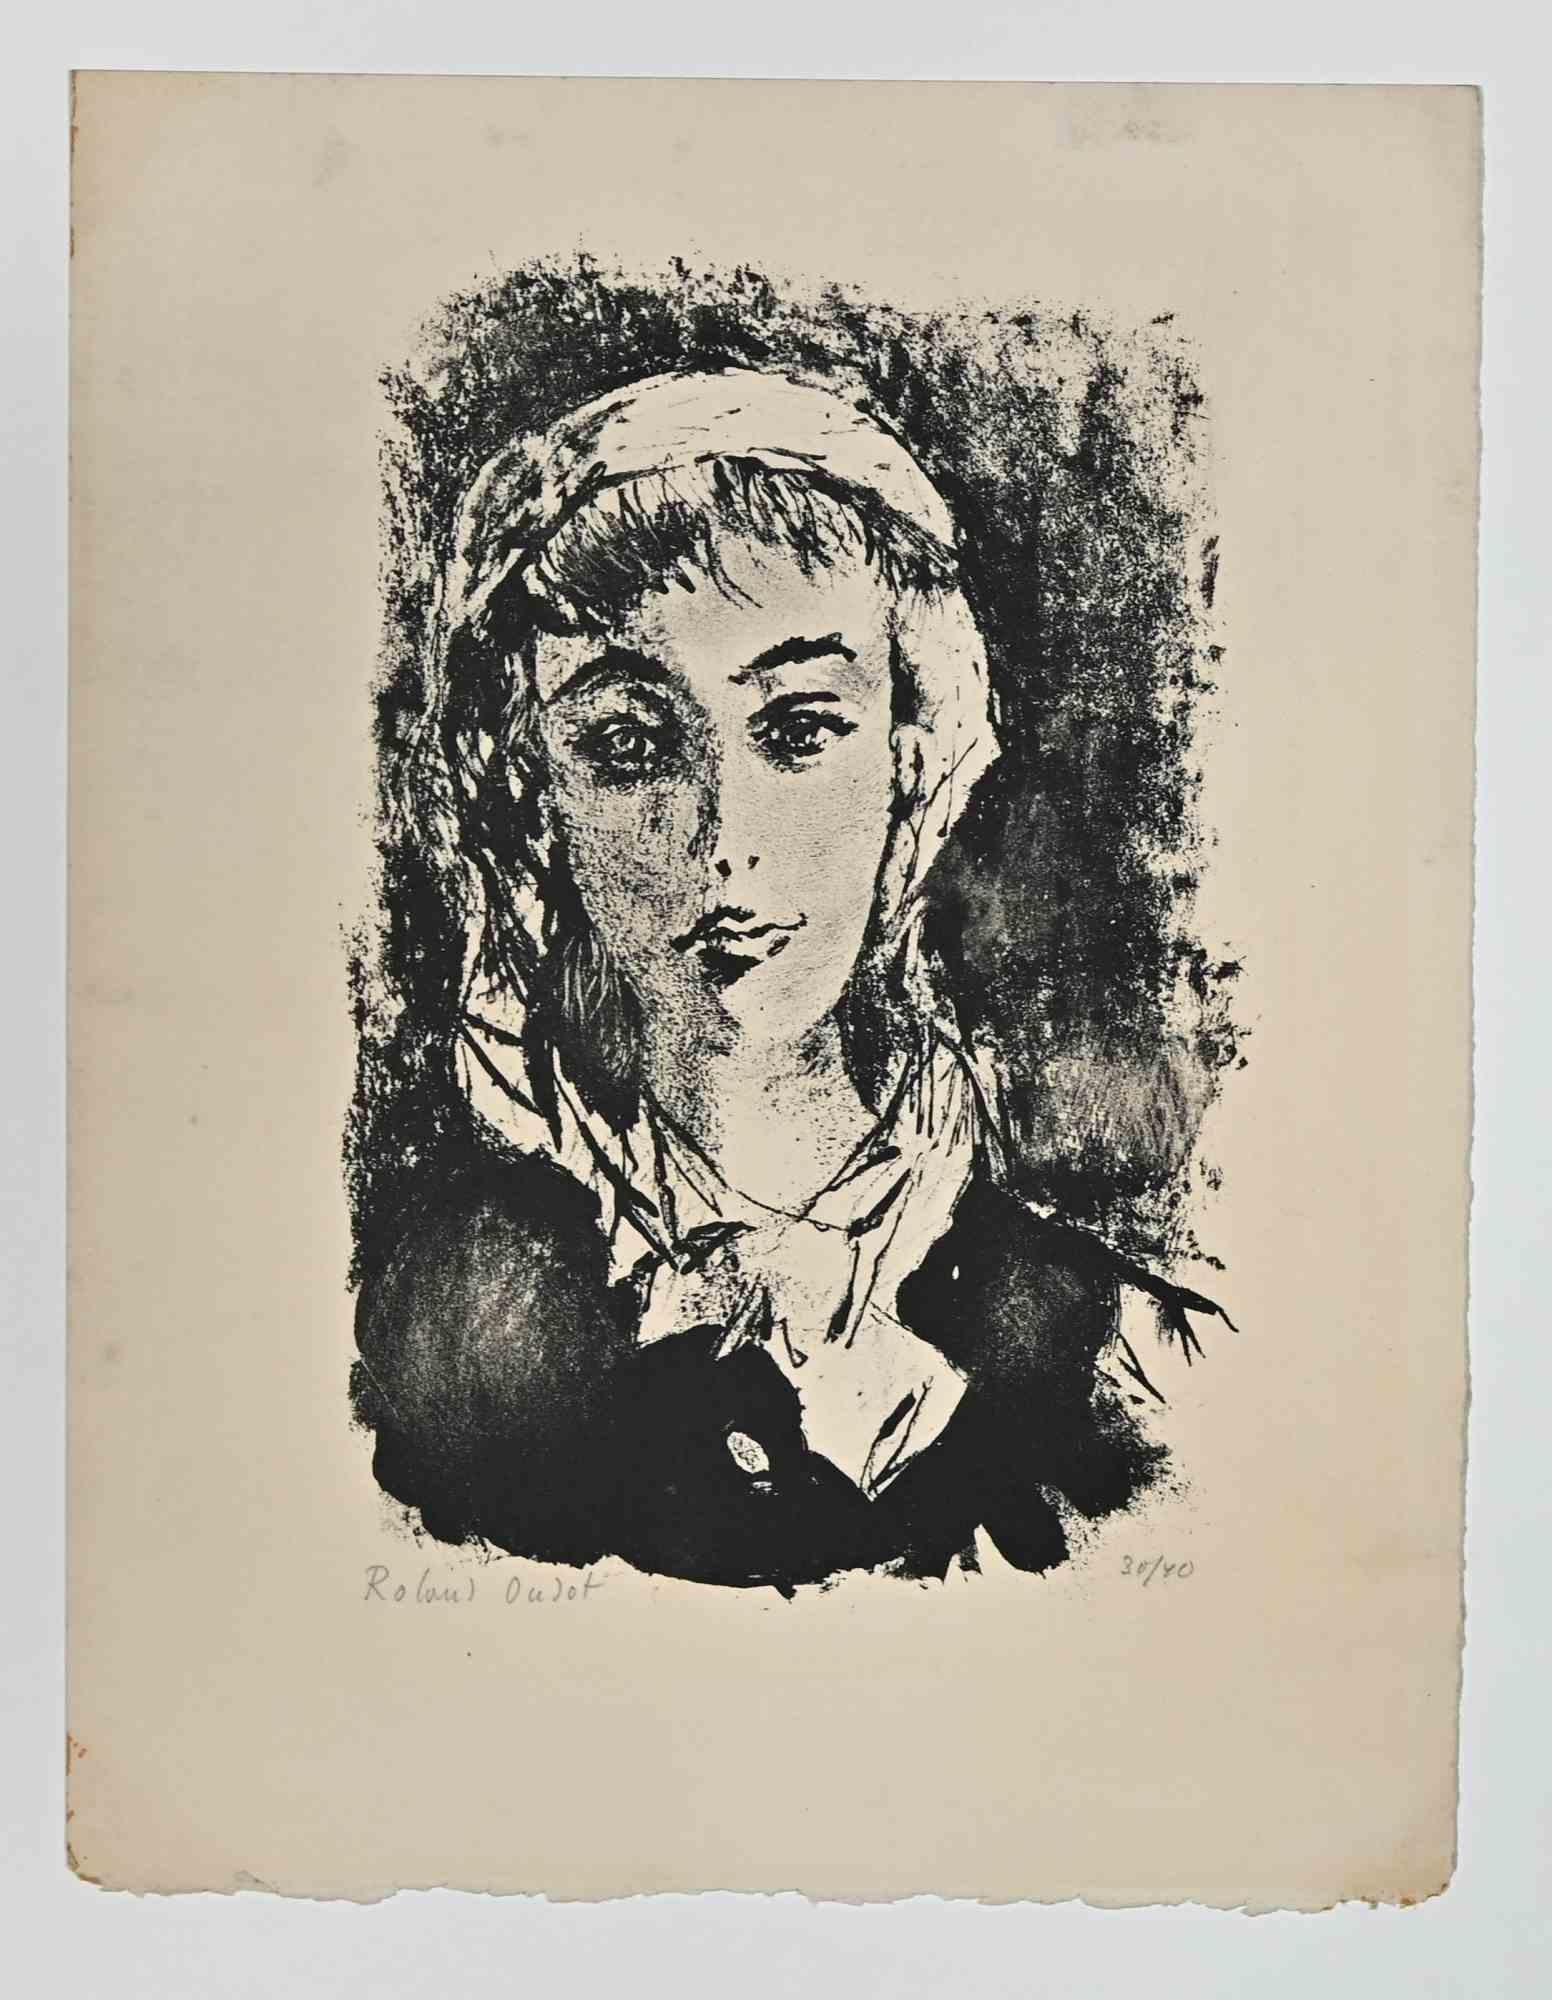 Portrait of a Woman is a litograph realized by Roland Oudot. Hand signed on the left corner and numbered 30/90 on the right corner.

Passpartout included cm 45x32.

Good conditions except some ripples on the paper.

Roland Oudot (1897 -